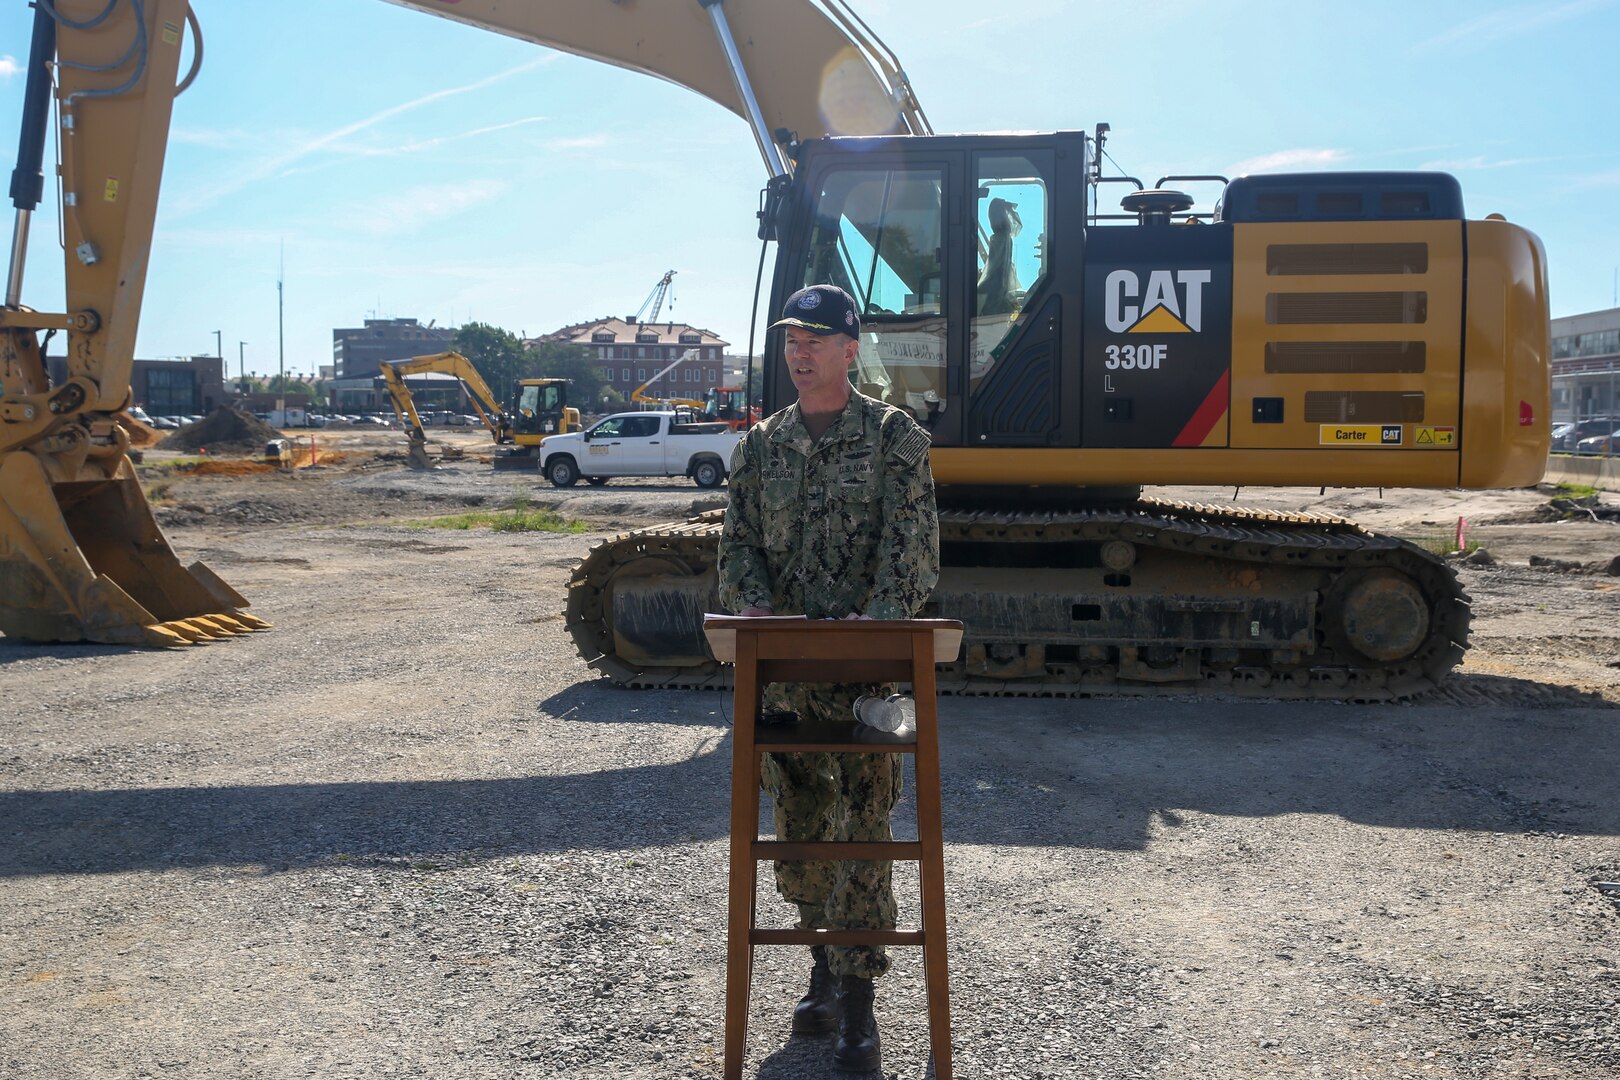 Norfolk Naval Shipyard (NNSY) Commander Captain Kai Torkelson provides remarks at the groundbreaking for NNSY’s new production training facility.  “In establishing this large, modern and consolidated training facility, we will provide a hub for the shipyard’s academic classrooms and on-the-job training areas, allowing theory and application to meet,” he said. “Innovation, collaboration and knowledge sharing will now transpire all under one roof, and streamlined to benefit our people.”